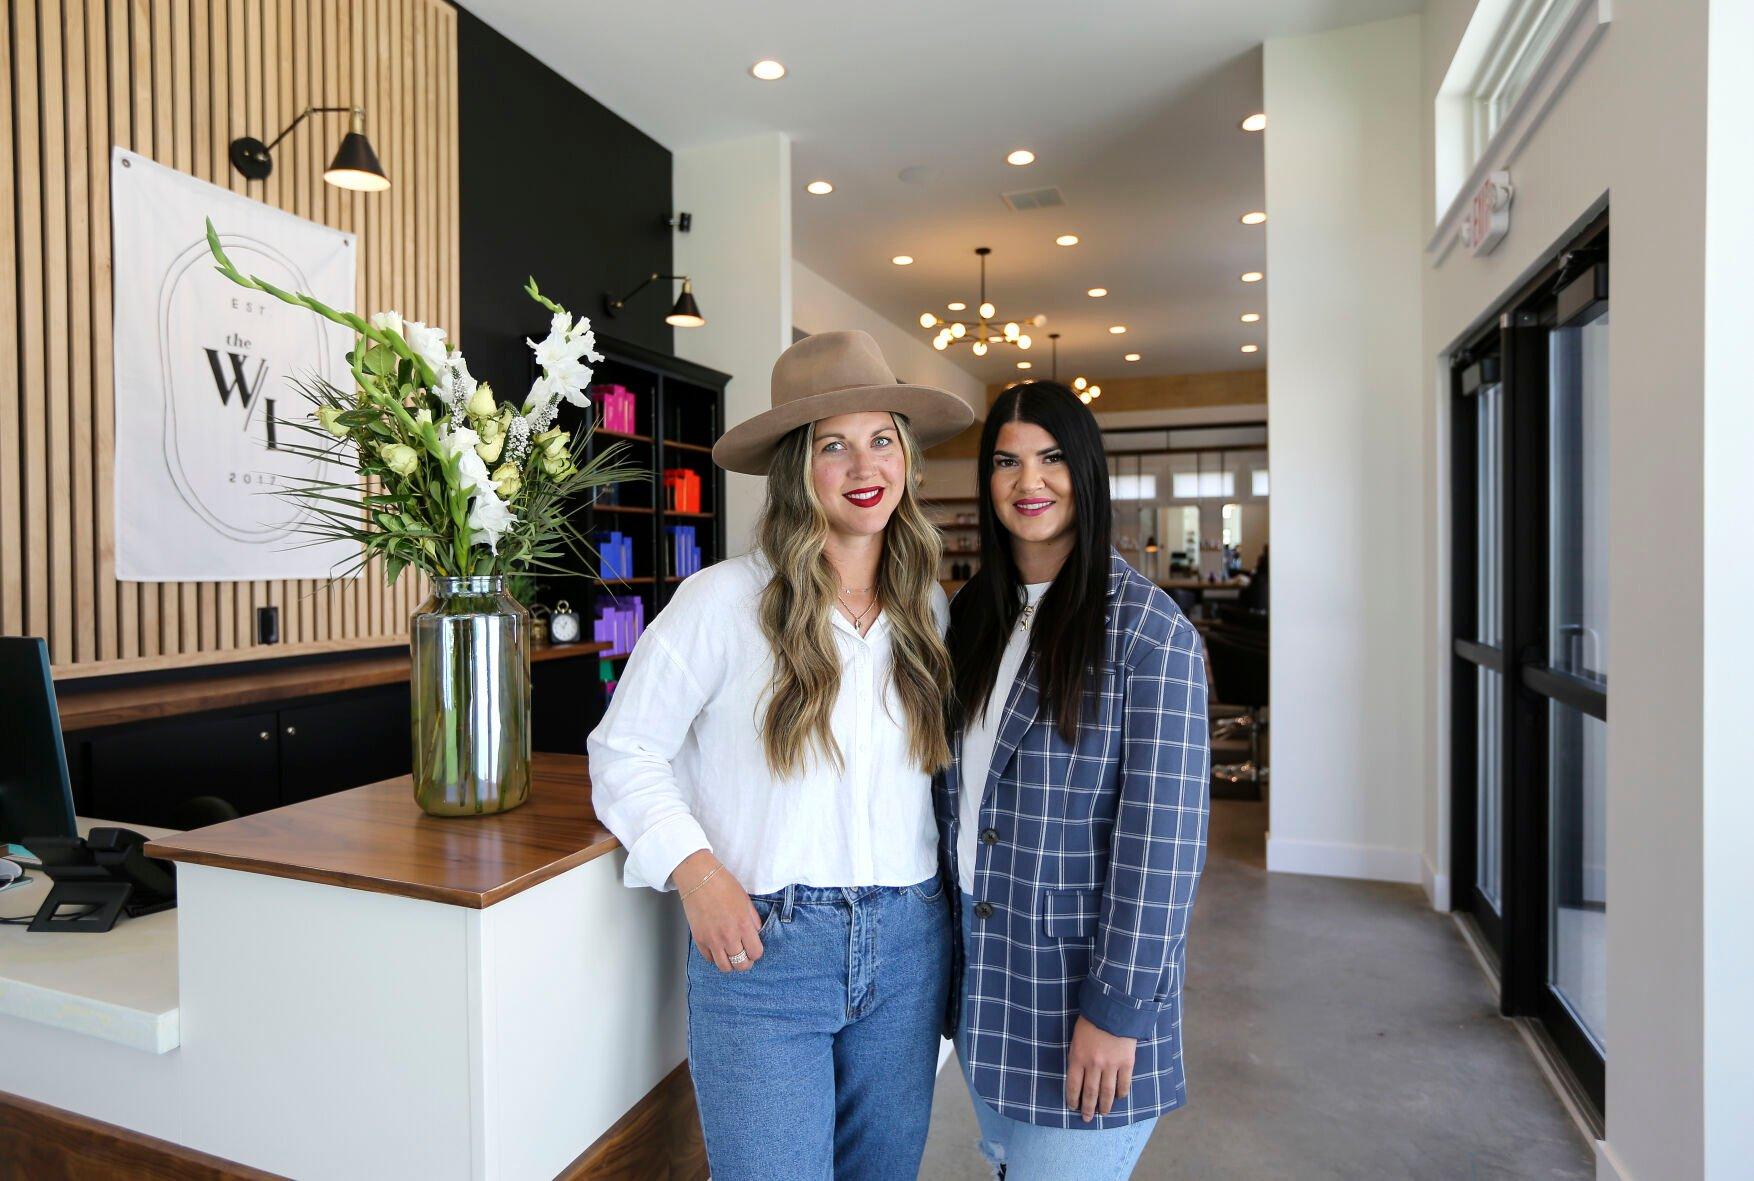 Daniella Dupont (left) and her sister Kandy Hosch co-own The White Loft located in Peosta, Iowa on Monday, July 17, 2023. The business has opened an expansion to the original building.    PHOTO CREDIT: Dave Kettering